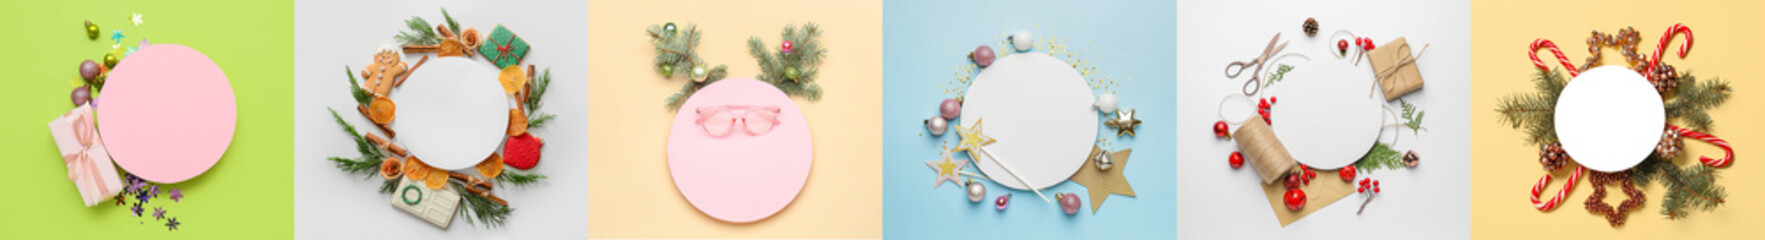 Beautiful Christmas compositions with blank round cards and decorations